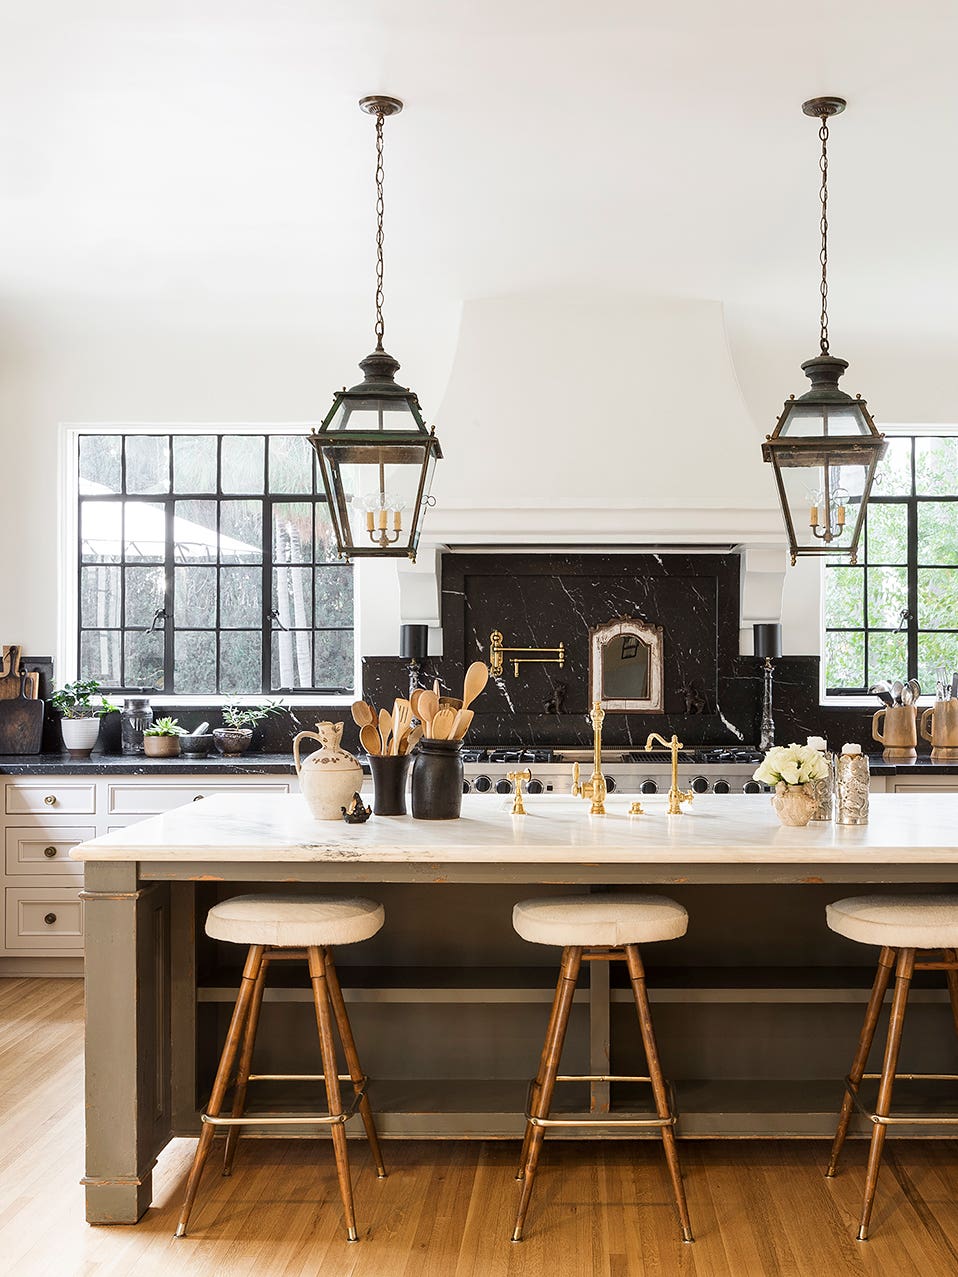 The Kitchen Trend Nate Berkus Says Will Never Go Out of Style